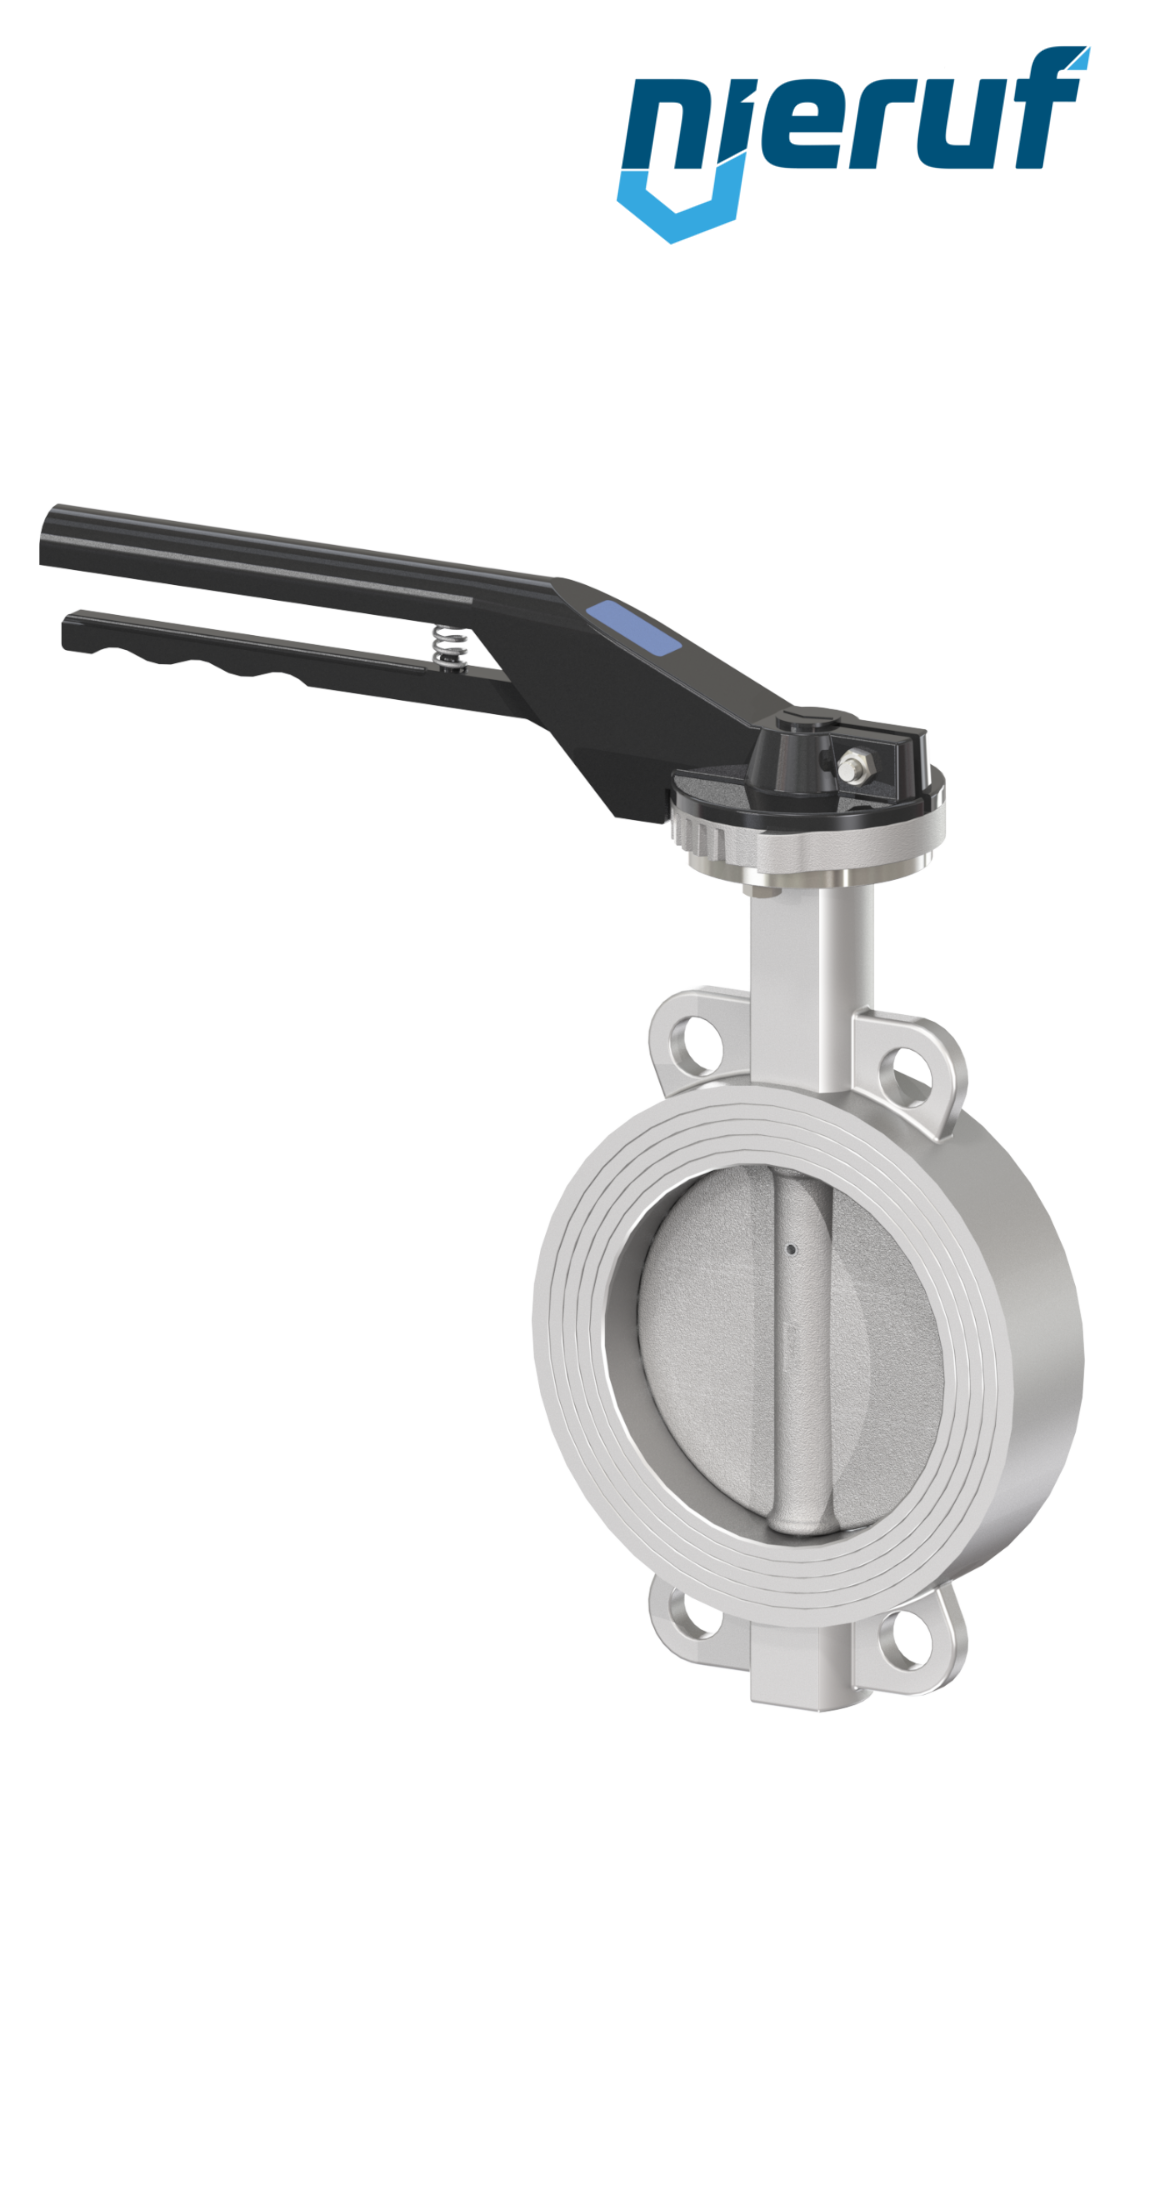 Butterfly-valve-stainless-steel DN 50 PN16 AK08 metall notch lever